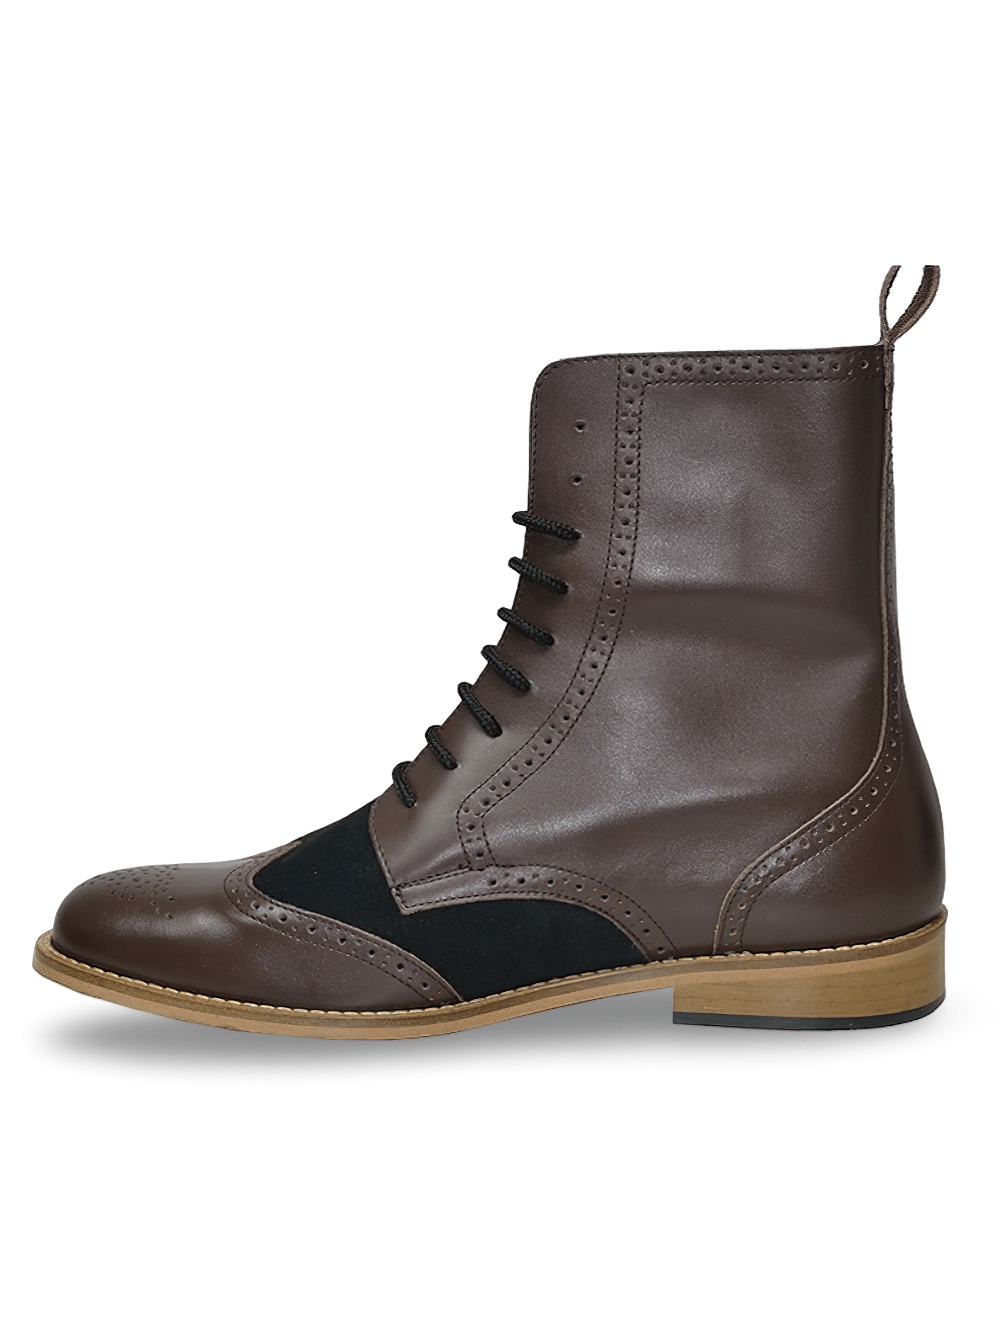 Stylish Brown And Black Leather Lace-Up Boots